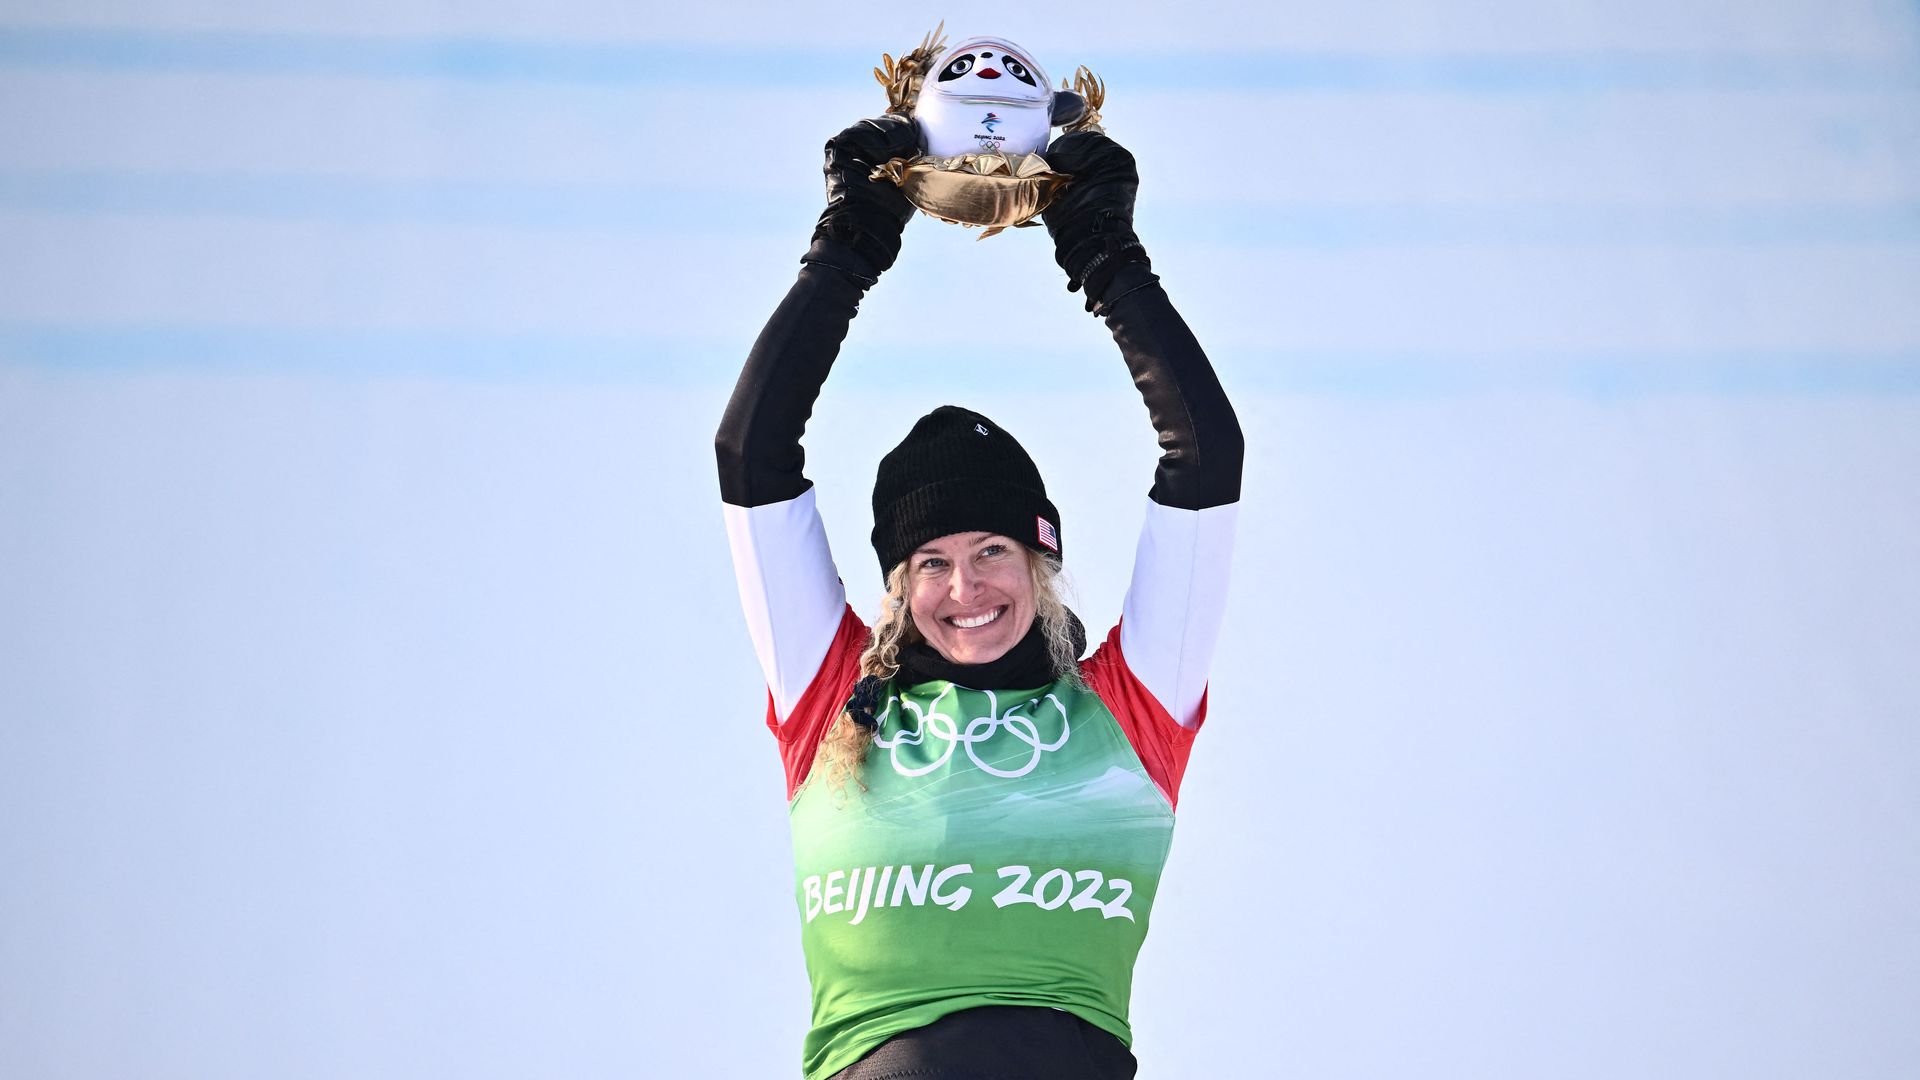  Gold medallist USA's Lindsey Jacobellis celebrates on the podium during the venue ceremony after the snowboard women's cross final during the Beijing 2022 Winter Olympic Games Feb. 9